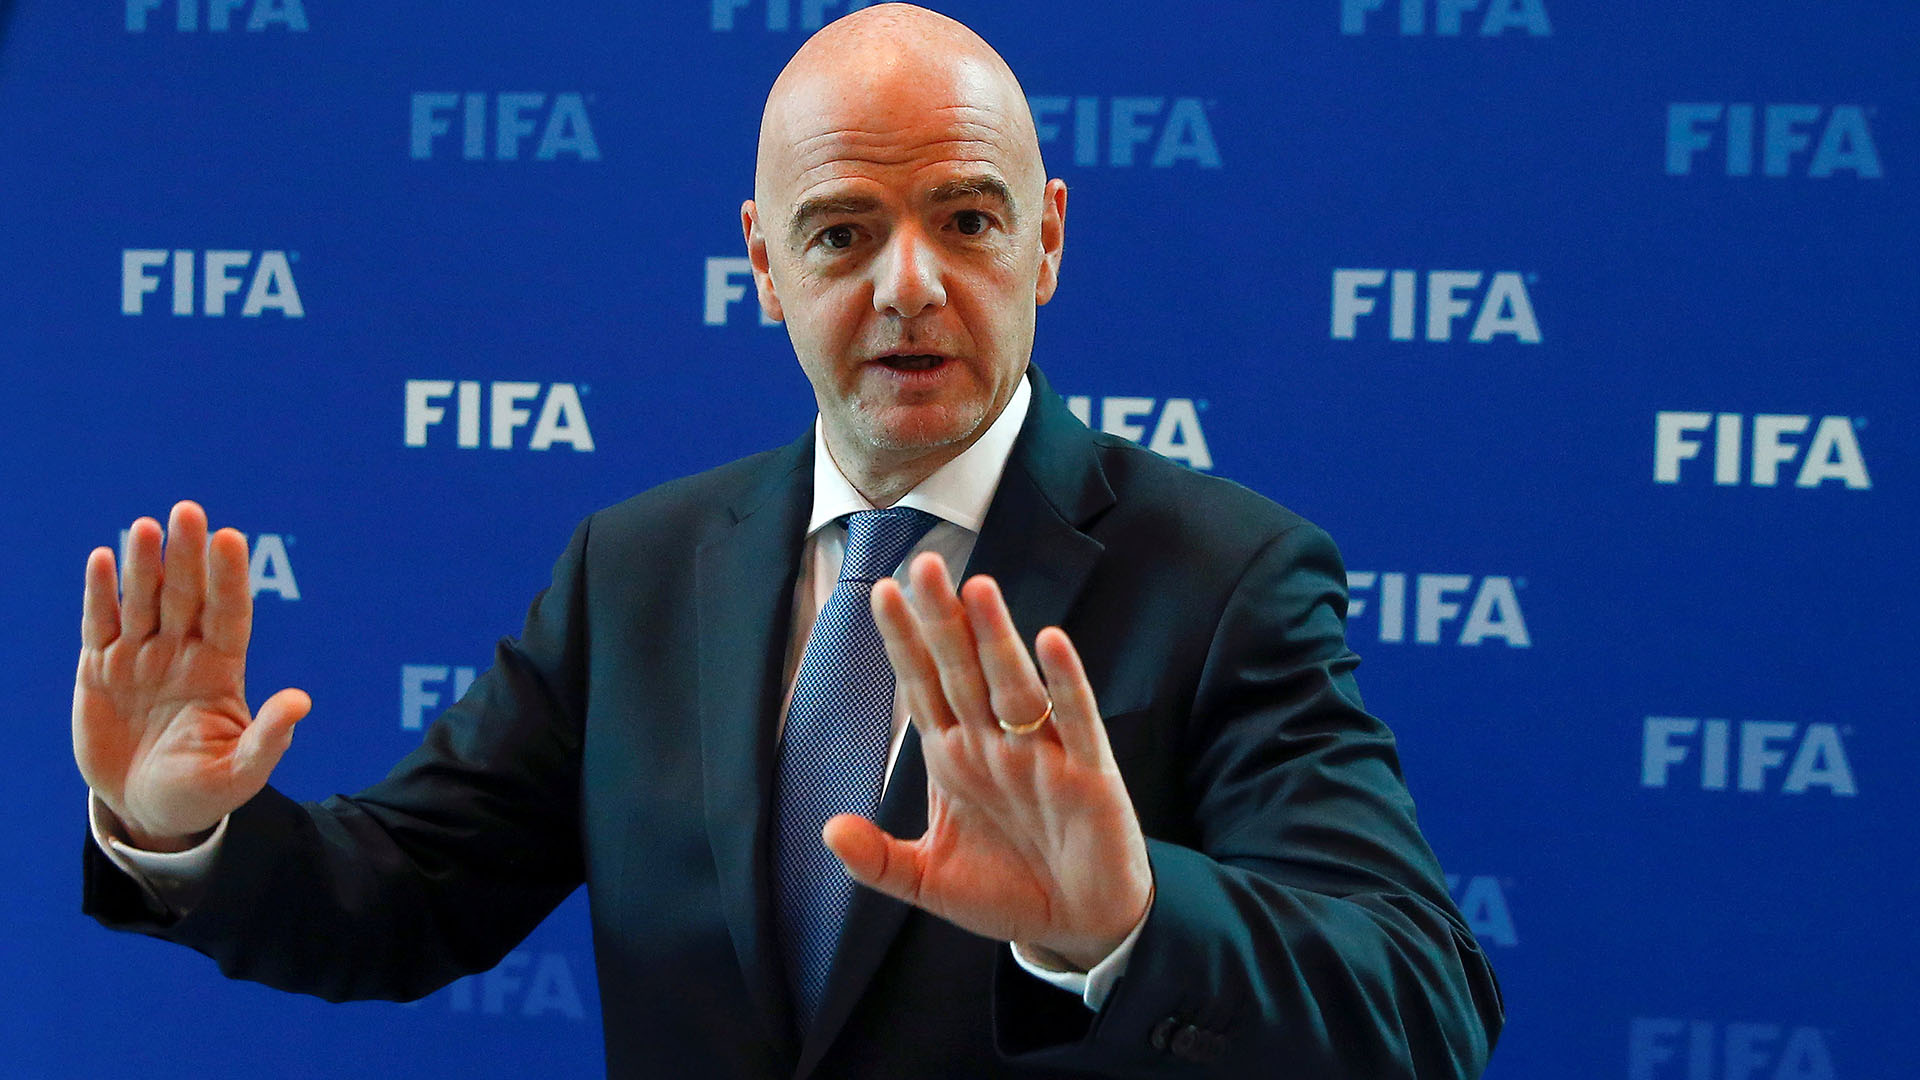 If Infantino prevails and there is a World Cup every two years, soccer will die